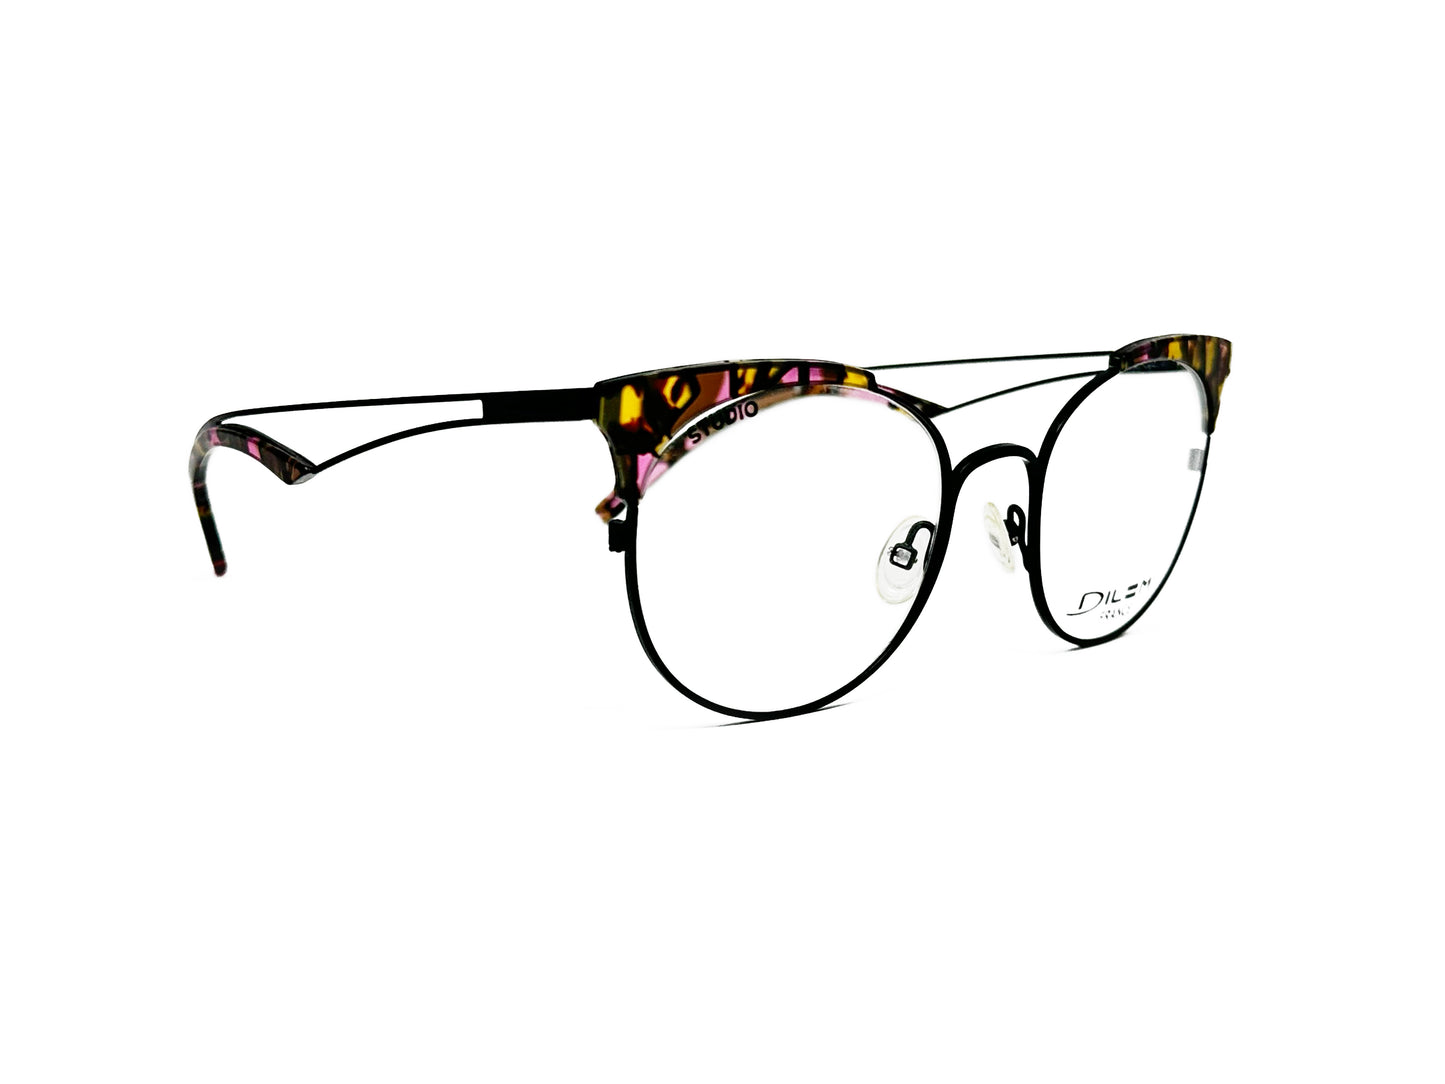 Dilem round , metal, with cat-eye acetate tips optical frame. Model: Z1b103D. Color: 3ASB01D - Yellow/Purple tortoise tips with black metal frame. Side view.